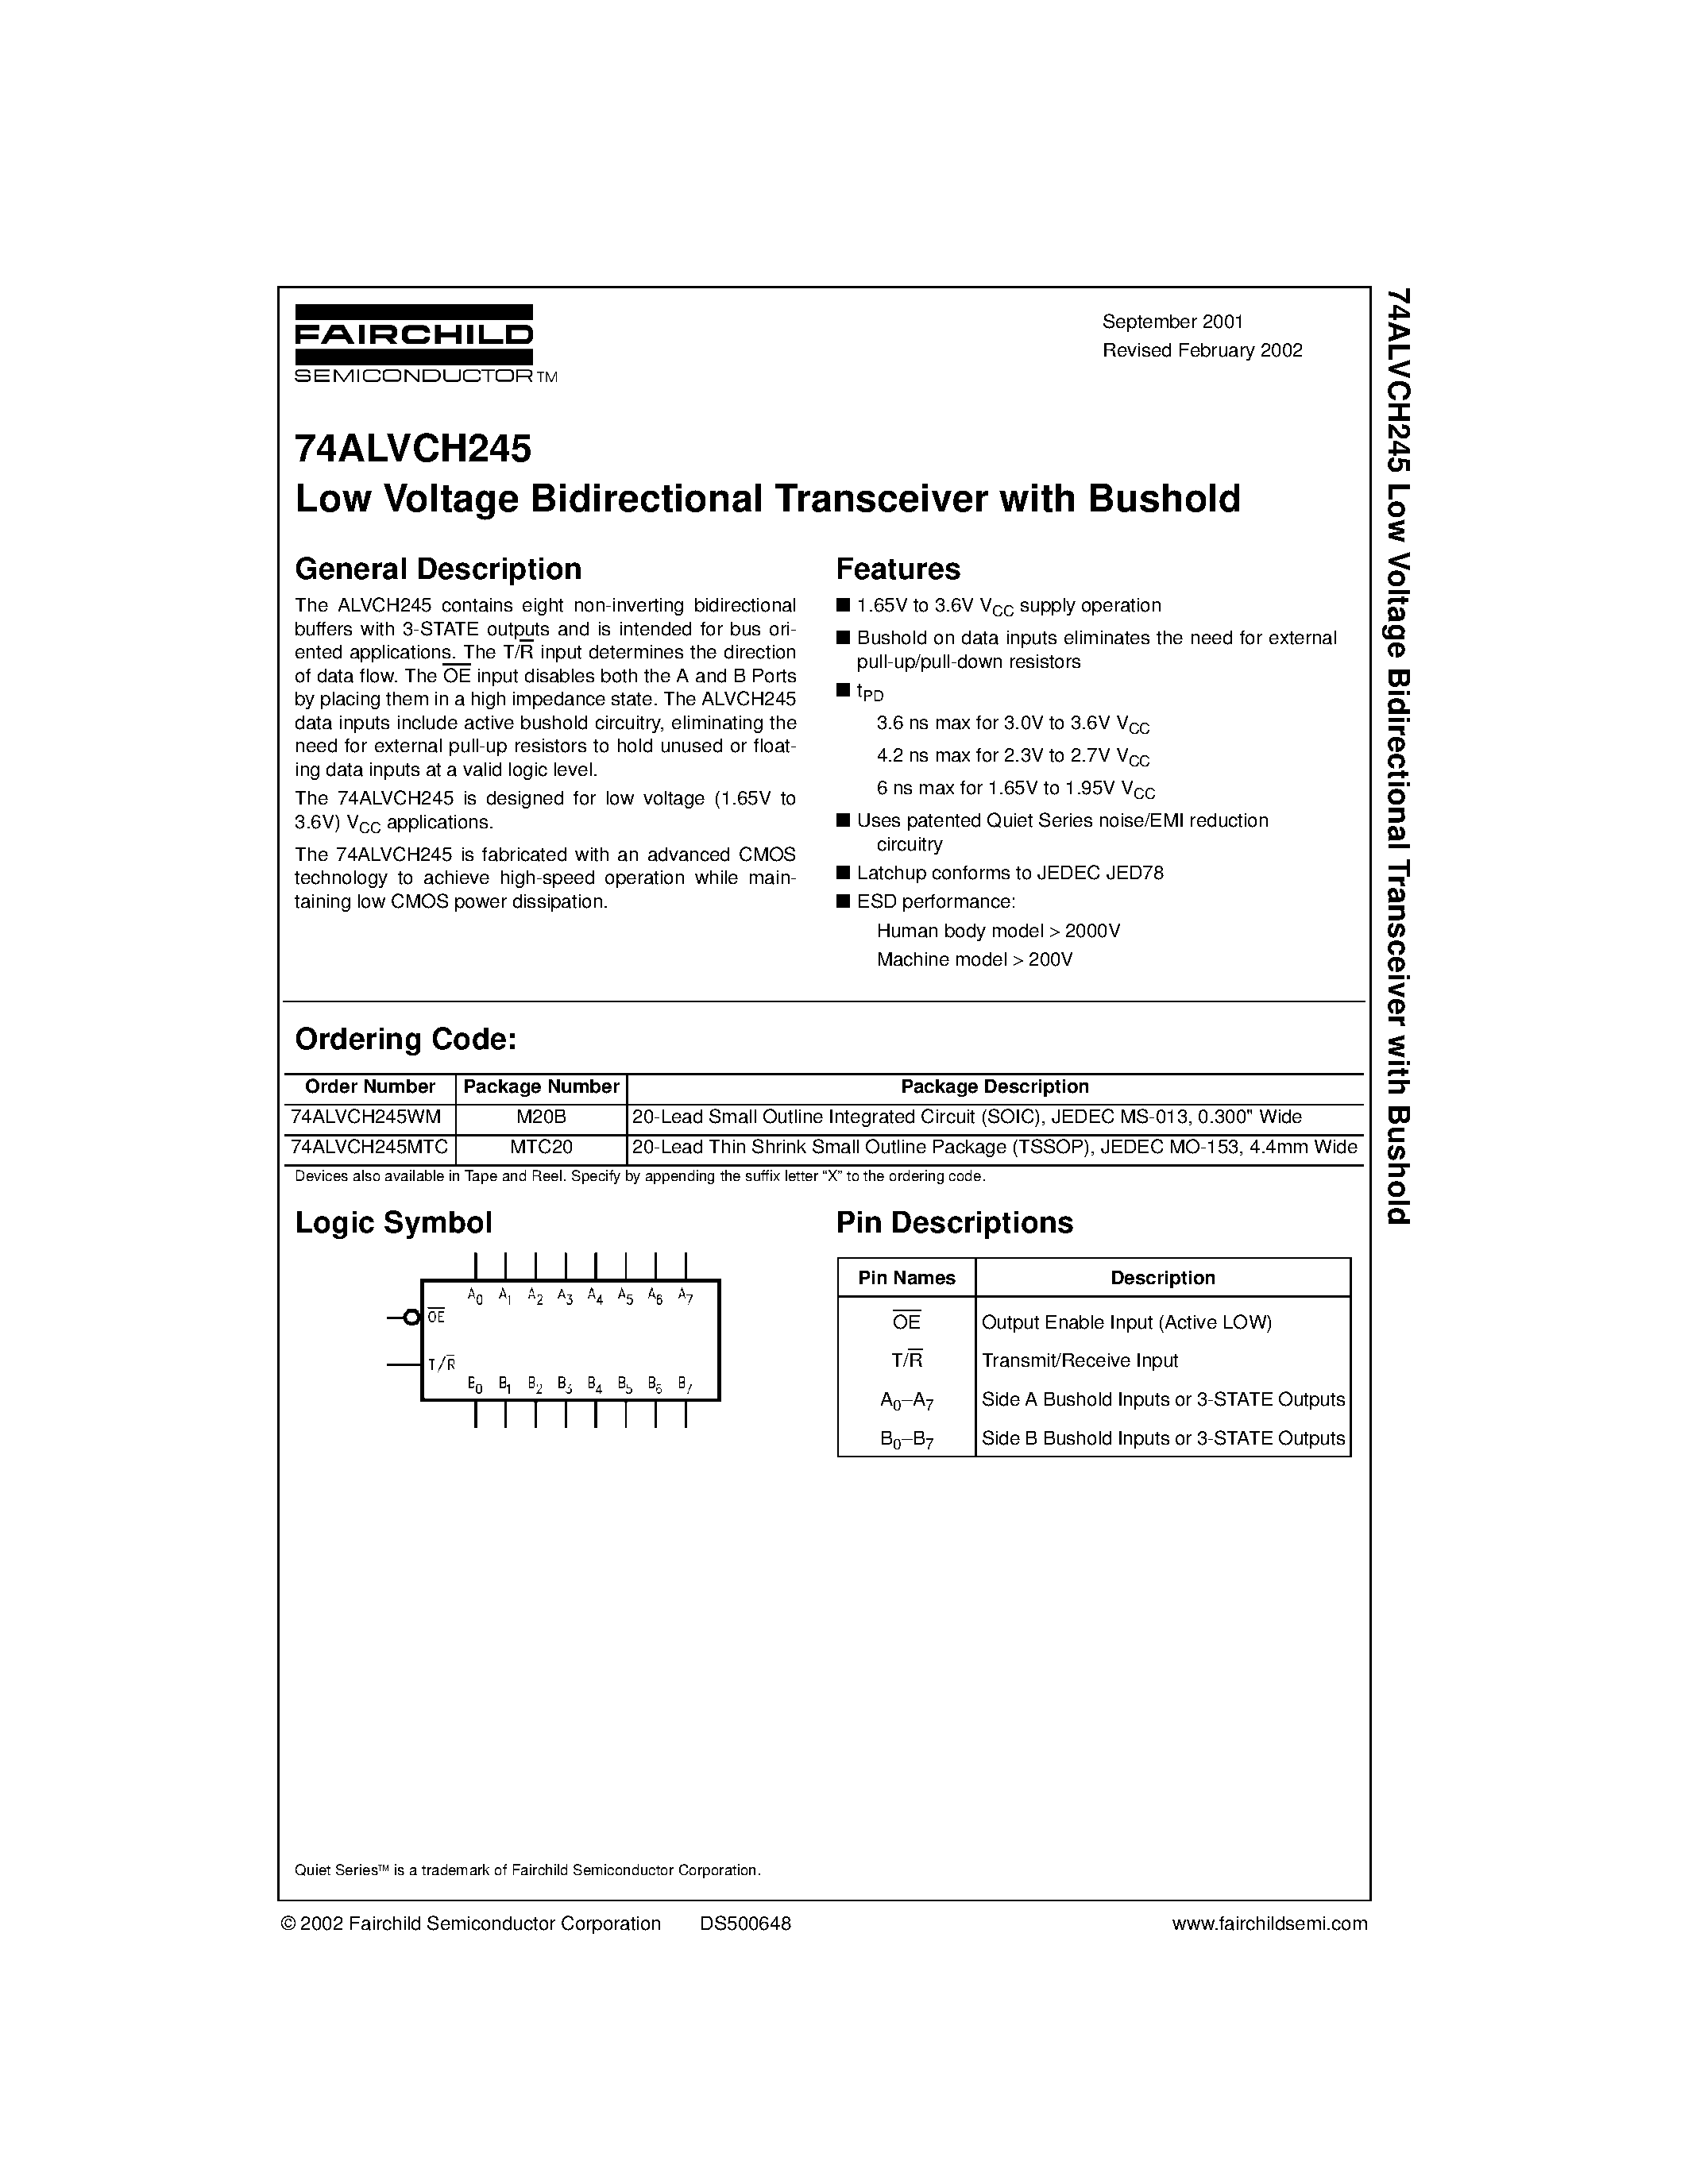 Datasheet 74ALVCH245WM - Low Voltage Bidirectional Transceiver with Bushold page 1